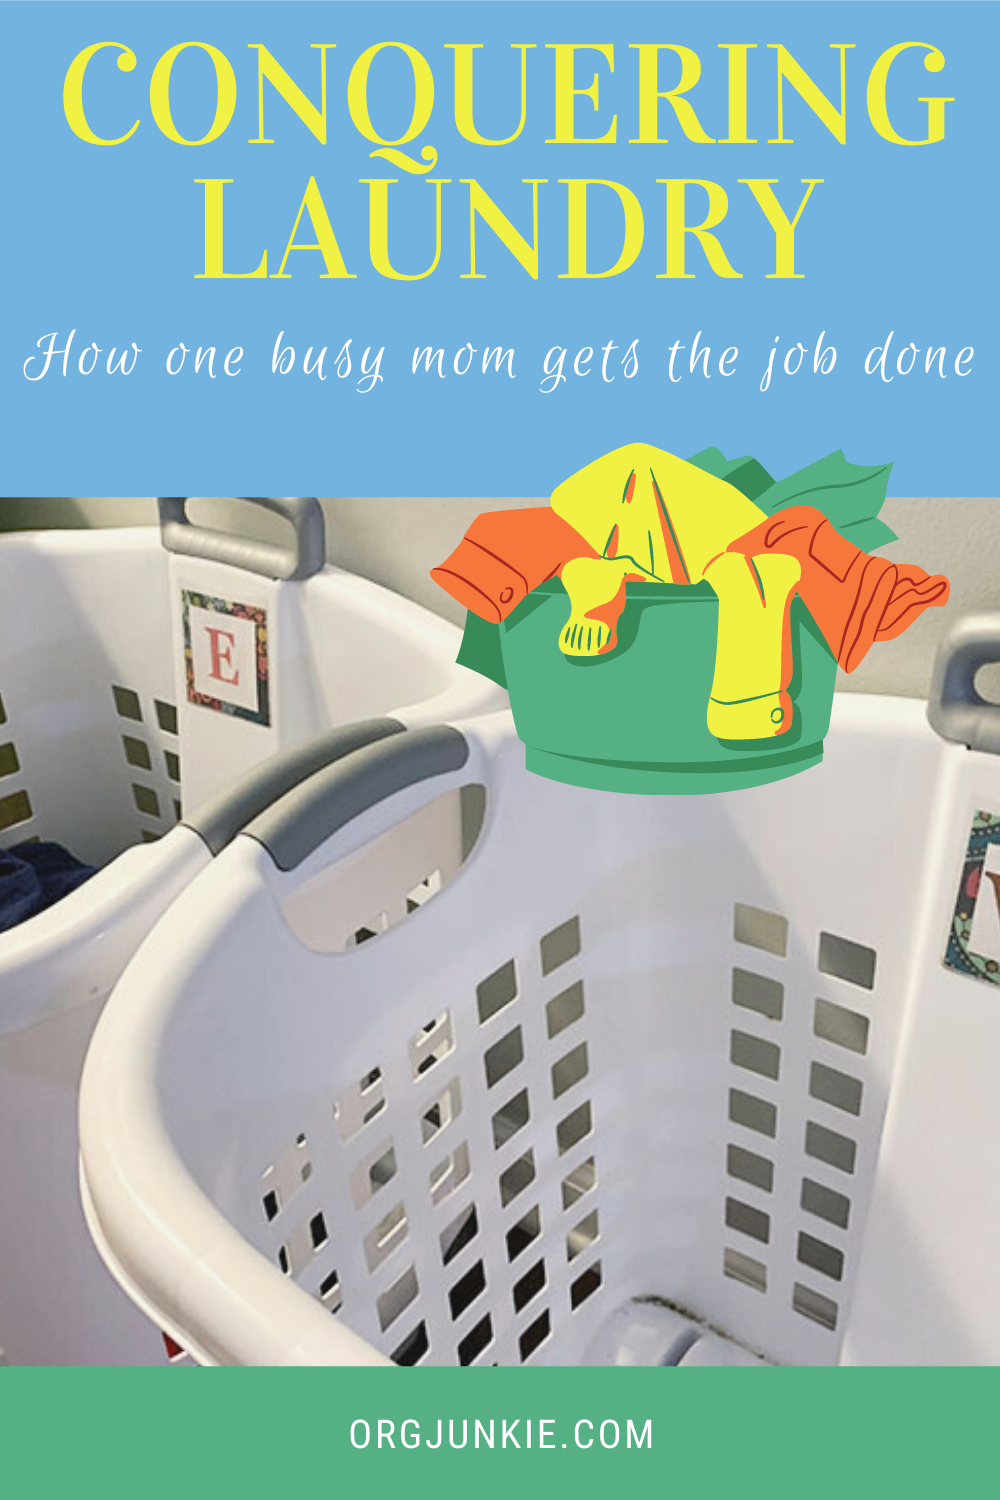 Conquering Laundry ~ How One Busy Mom Gets the Job Done at I'm an Organizing Junkie blog